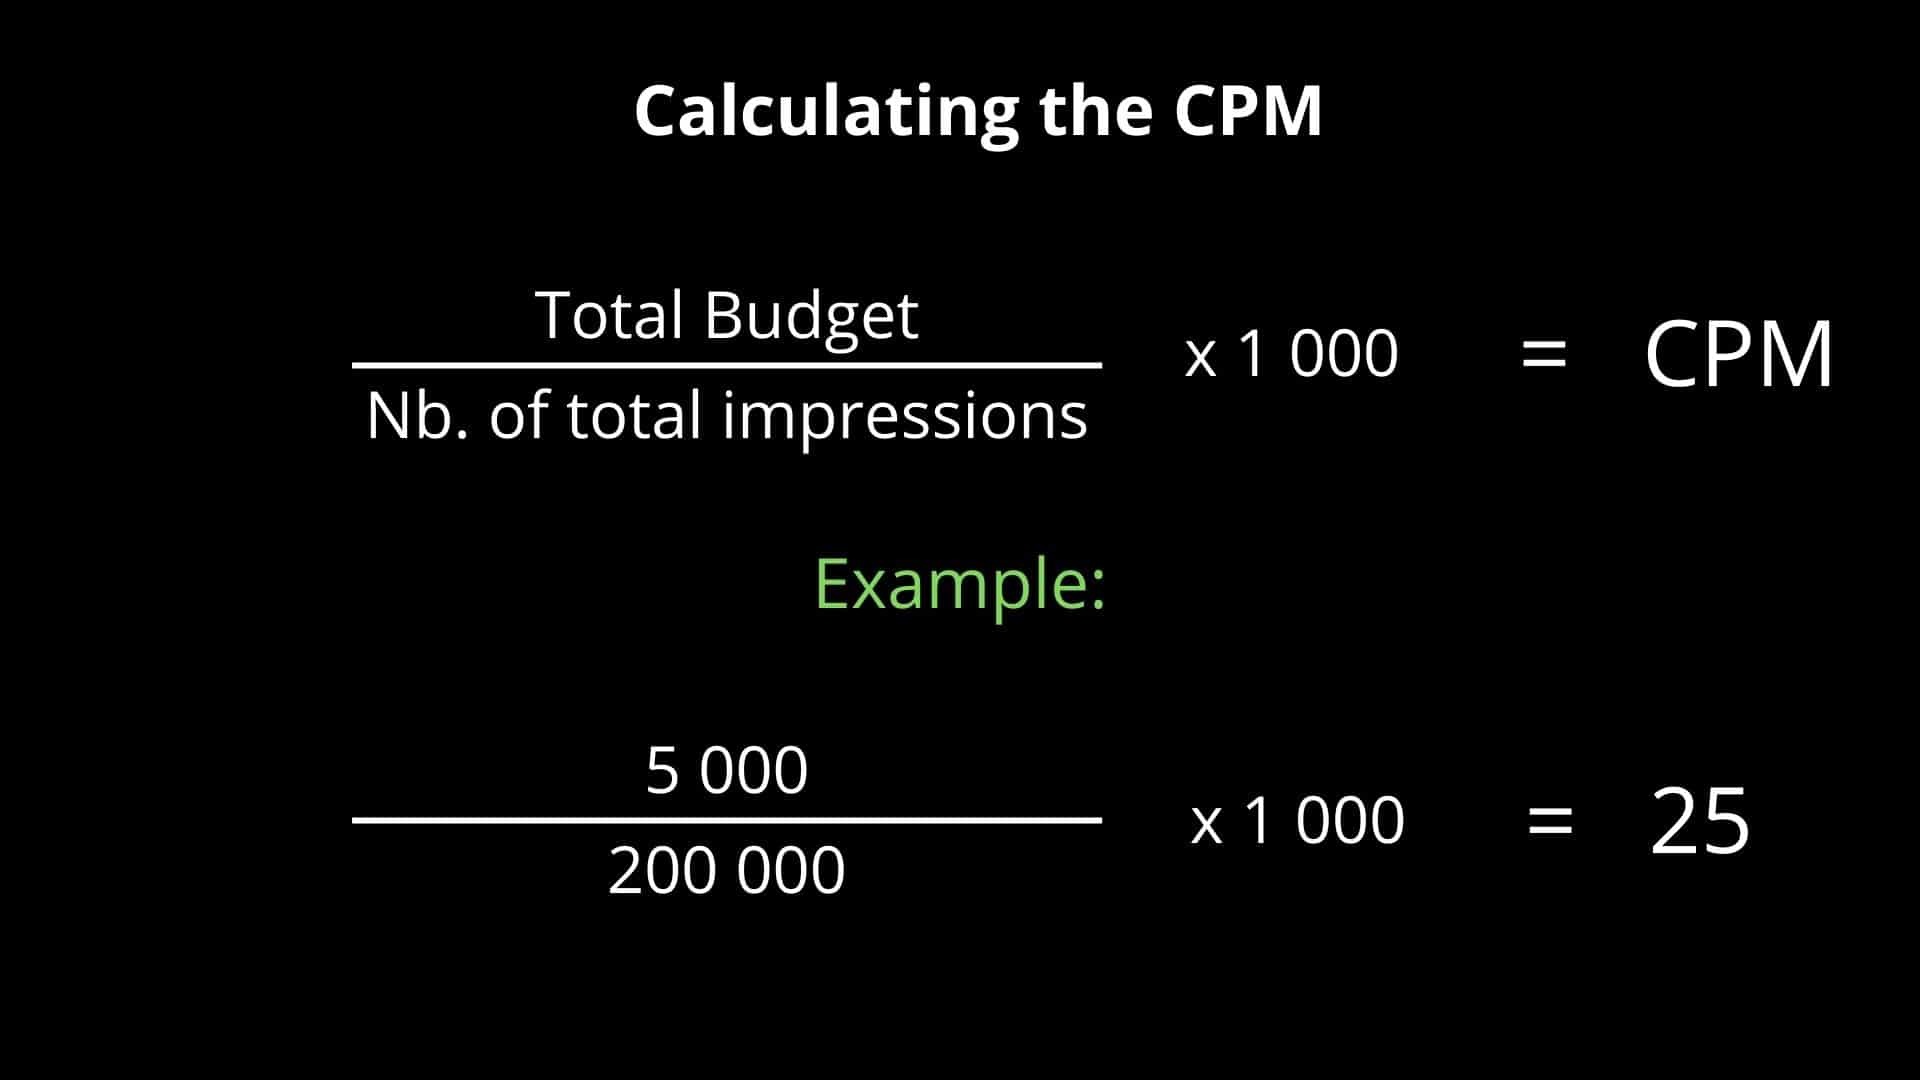 CPM Calculator - The Online Advertising Guide